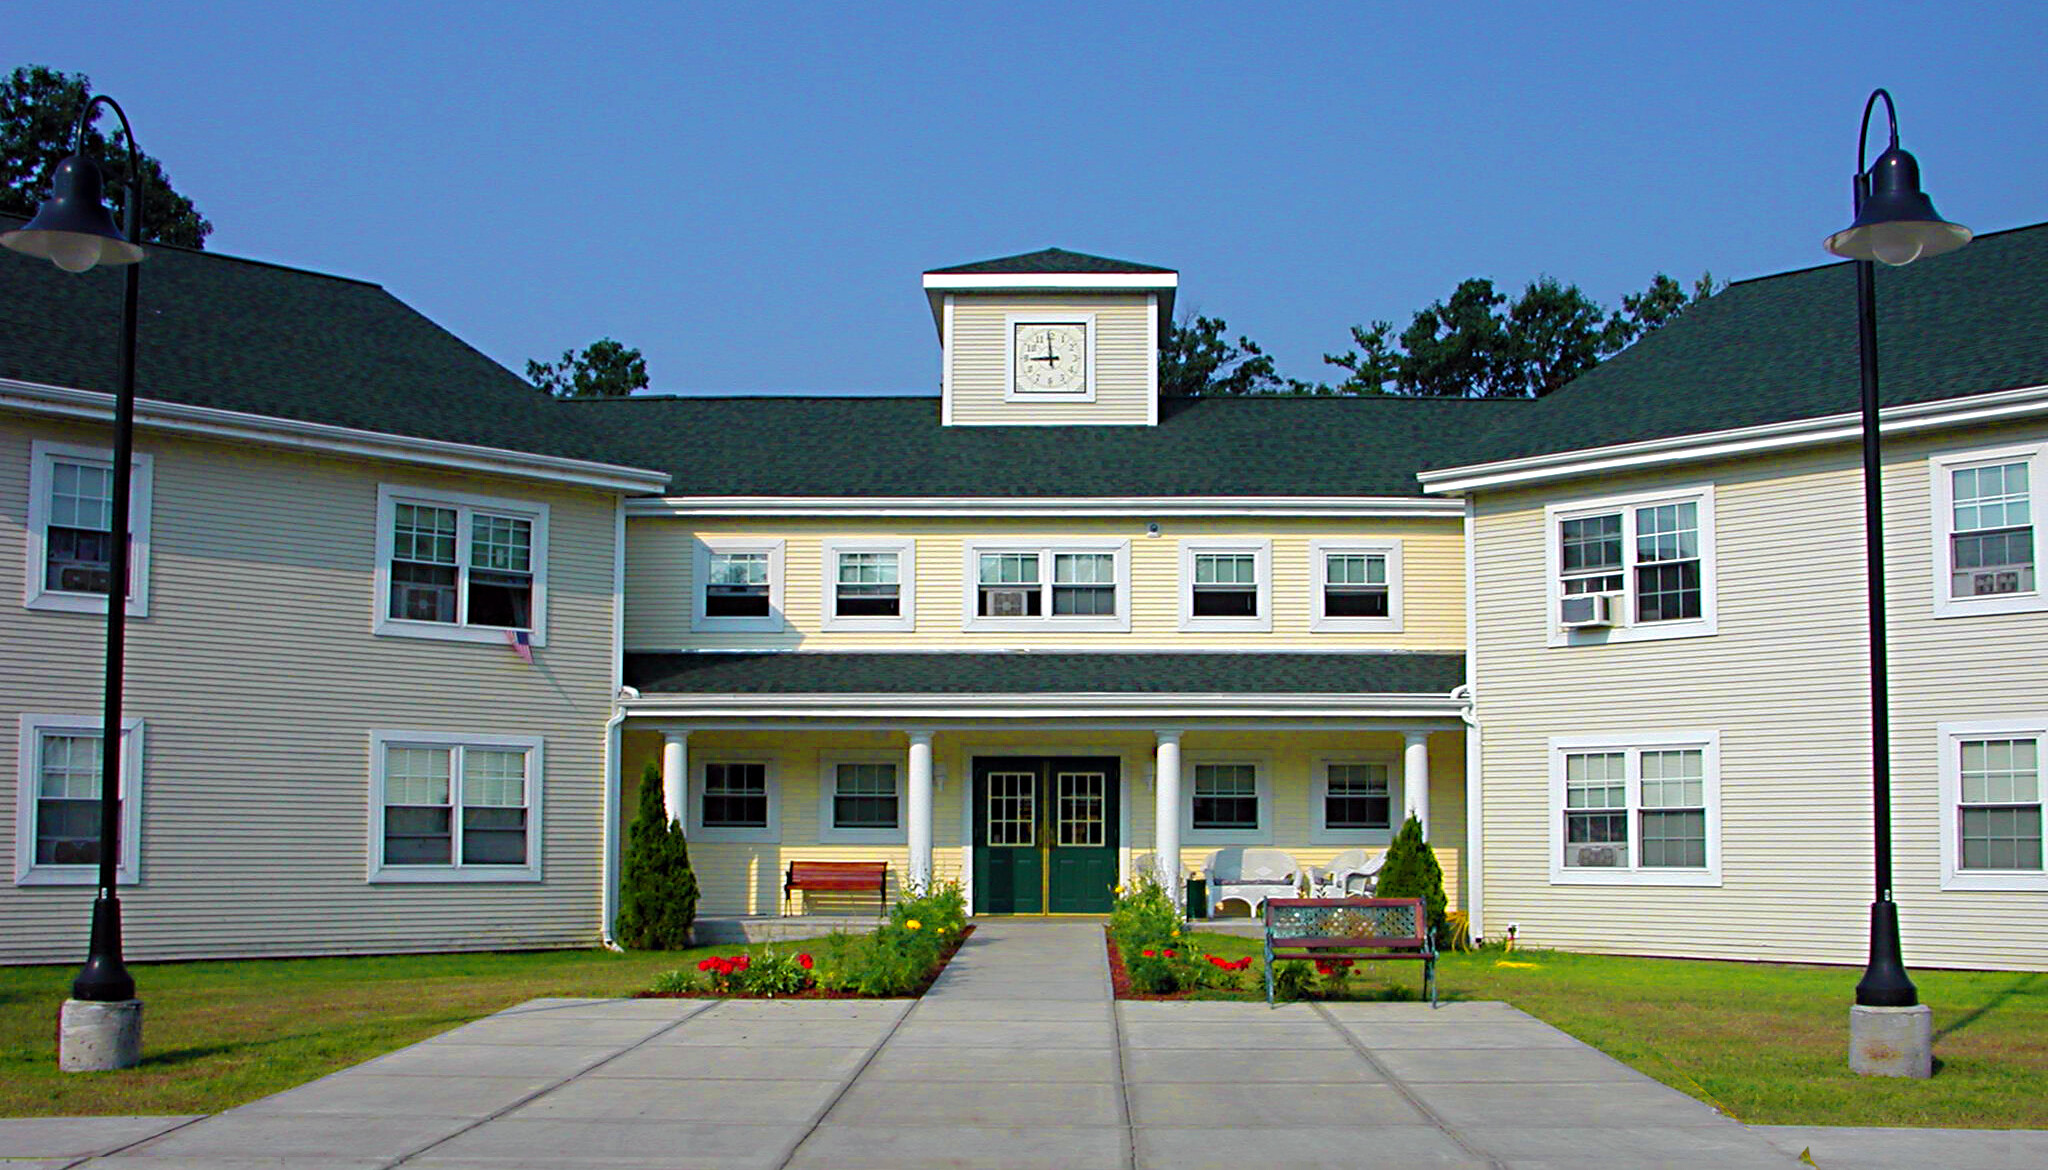 Holy Cross Senior Housing Cathedral Square